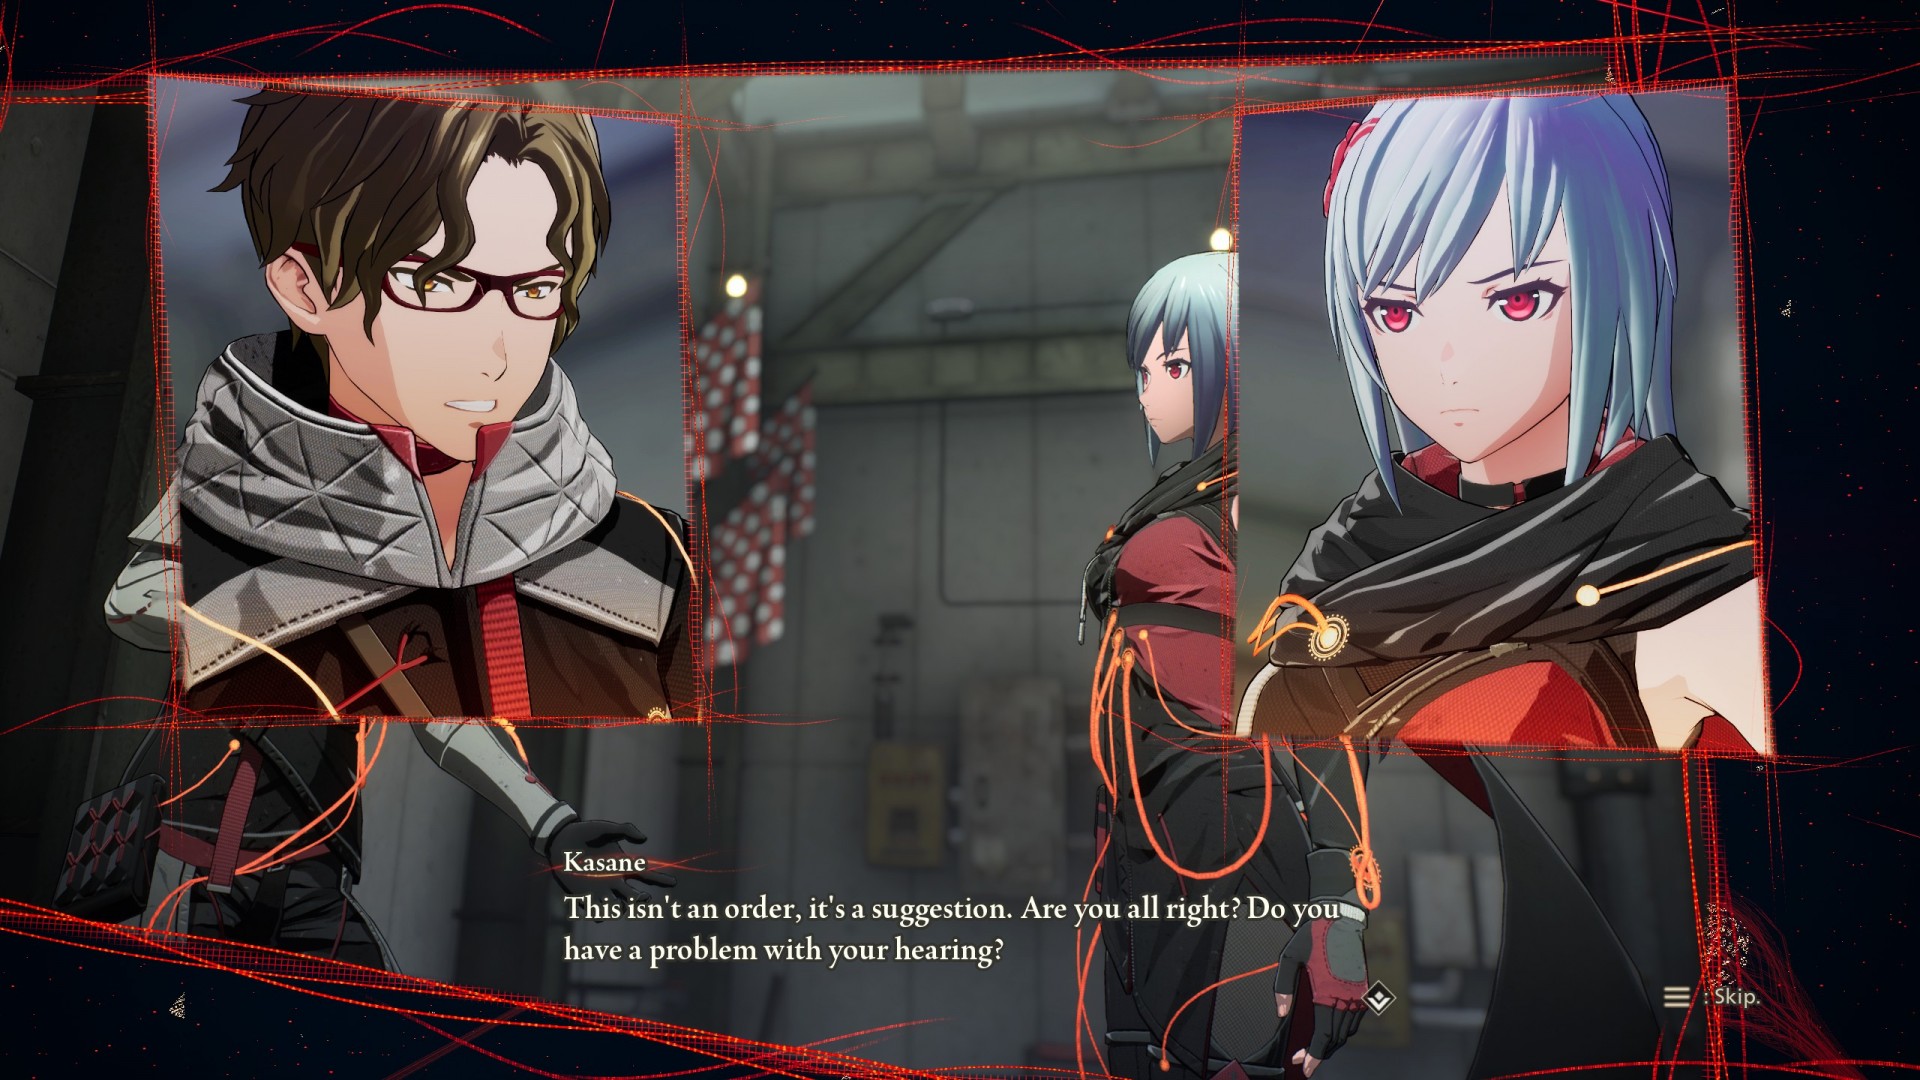 Scarlet Nexus Review Impressions: Is the Anime ARPG Worth It? Gameplay -  Before You Buy 